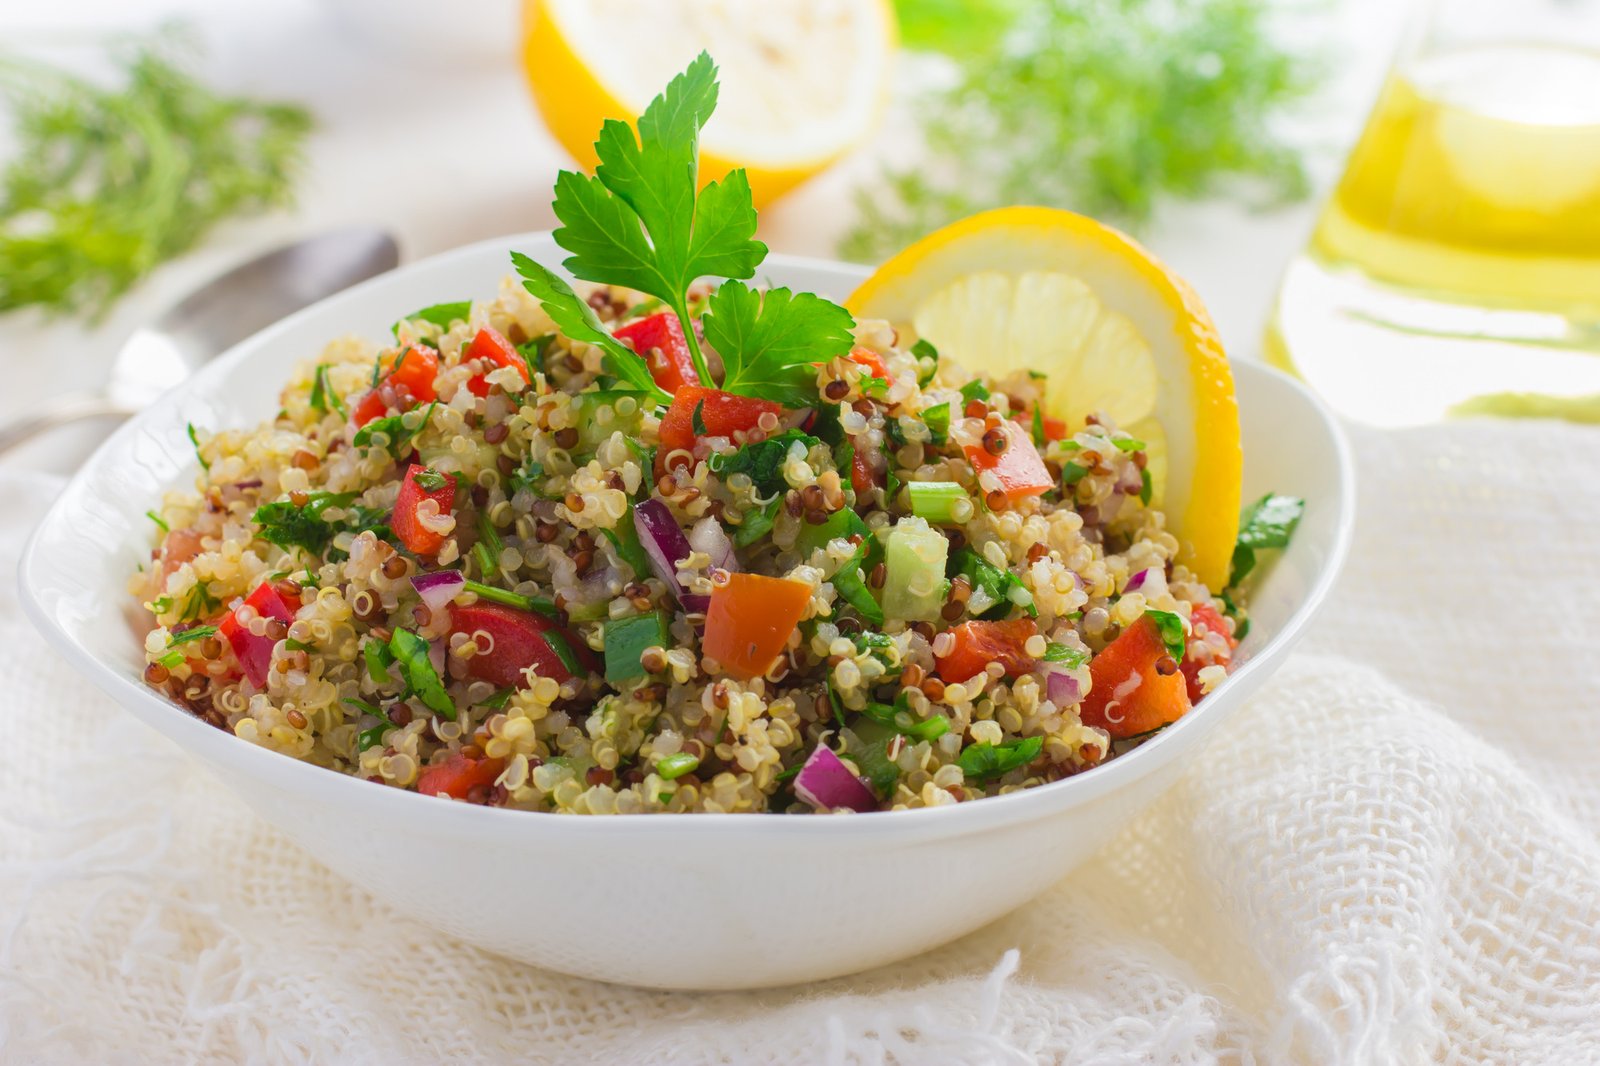 Tabbouleh salad with quinoa, parsley and vegetables on white background